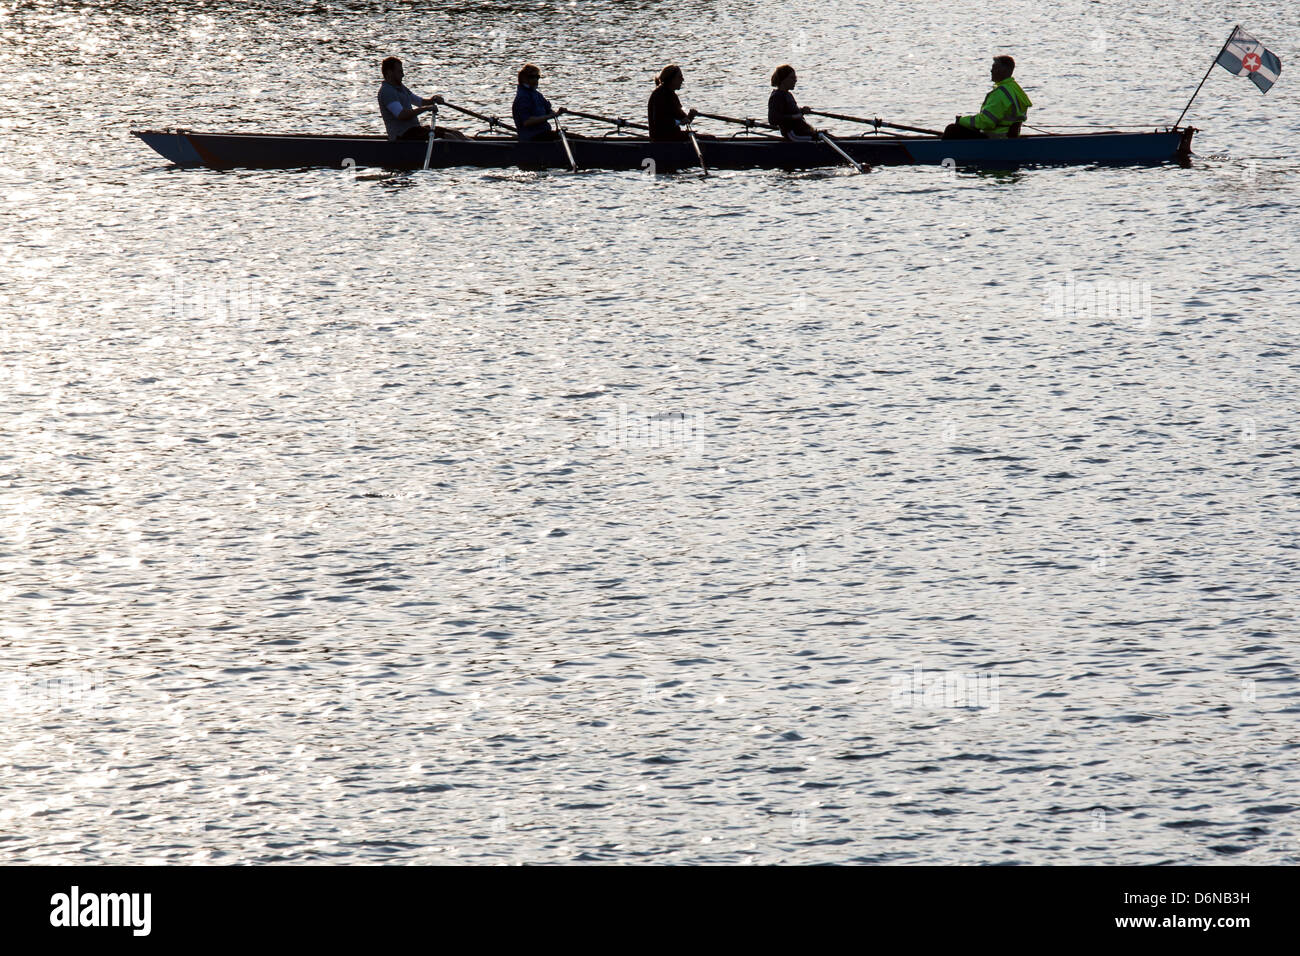 Berlin, Germany, with four rowers coxswain on the Stölpchensee Stock Photo